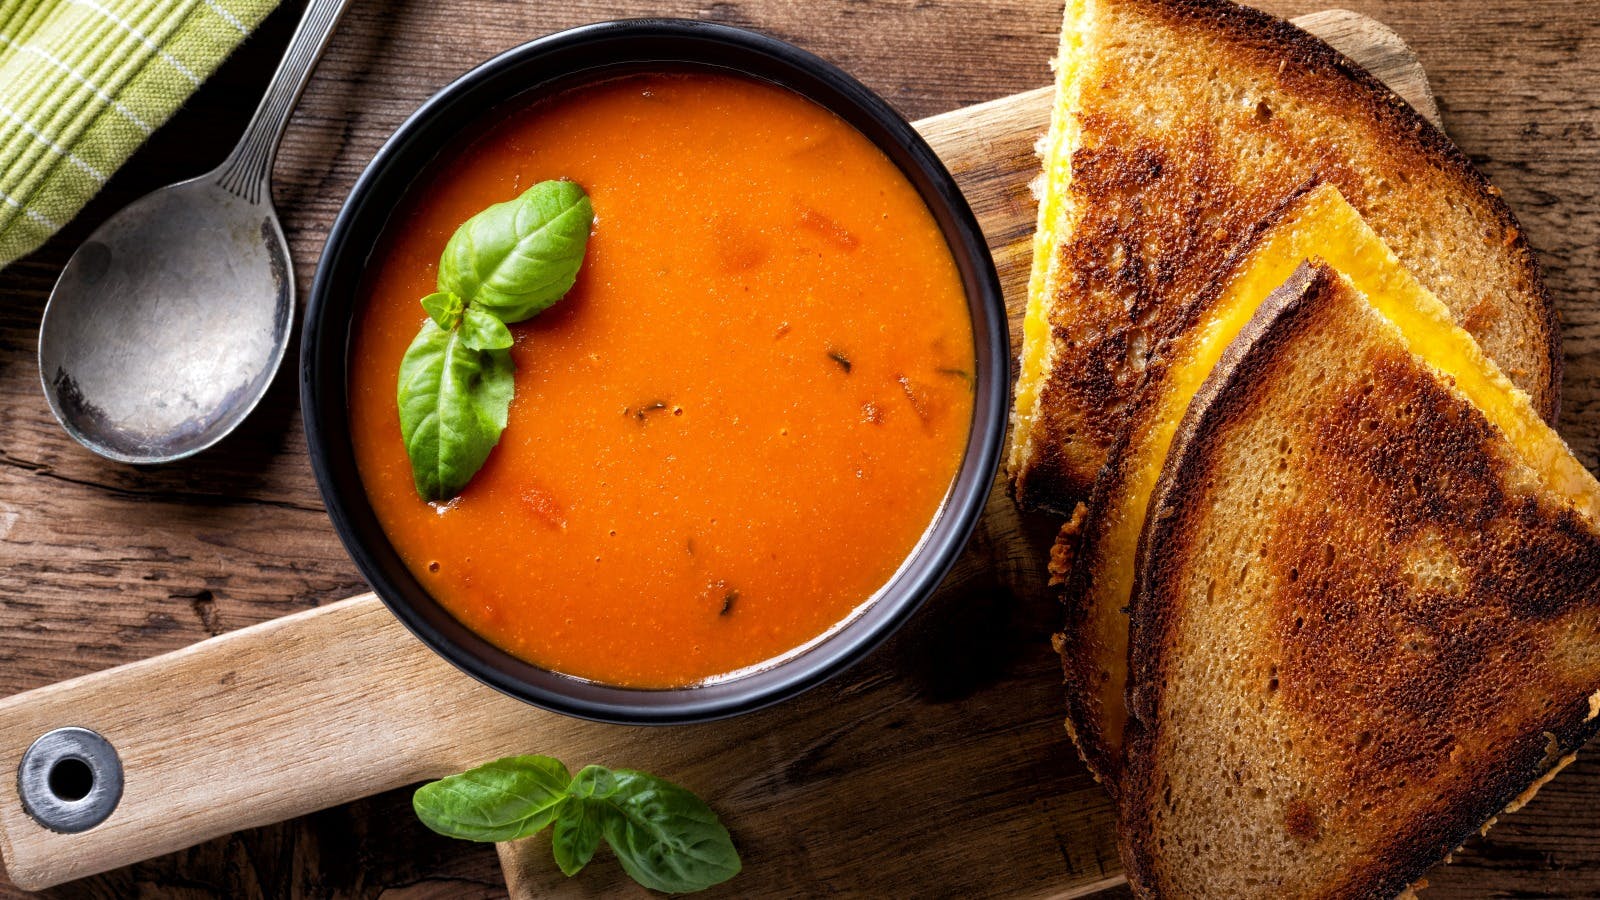 With This Tomato Soup: What To Serve